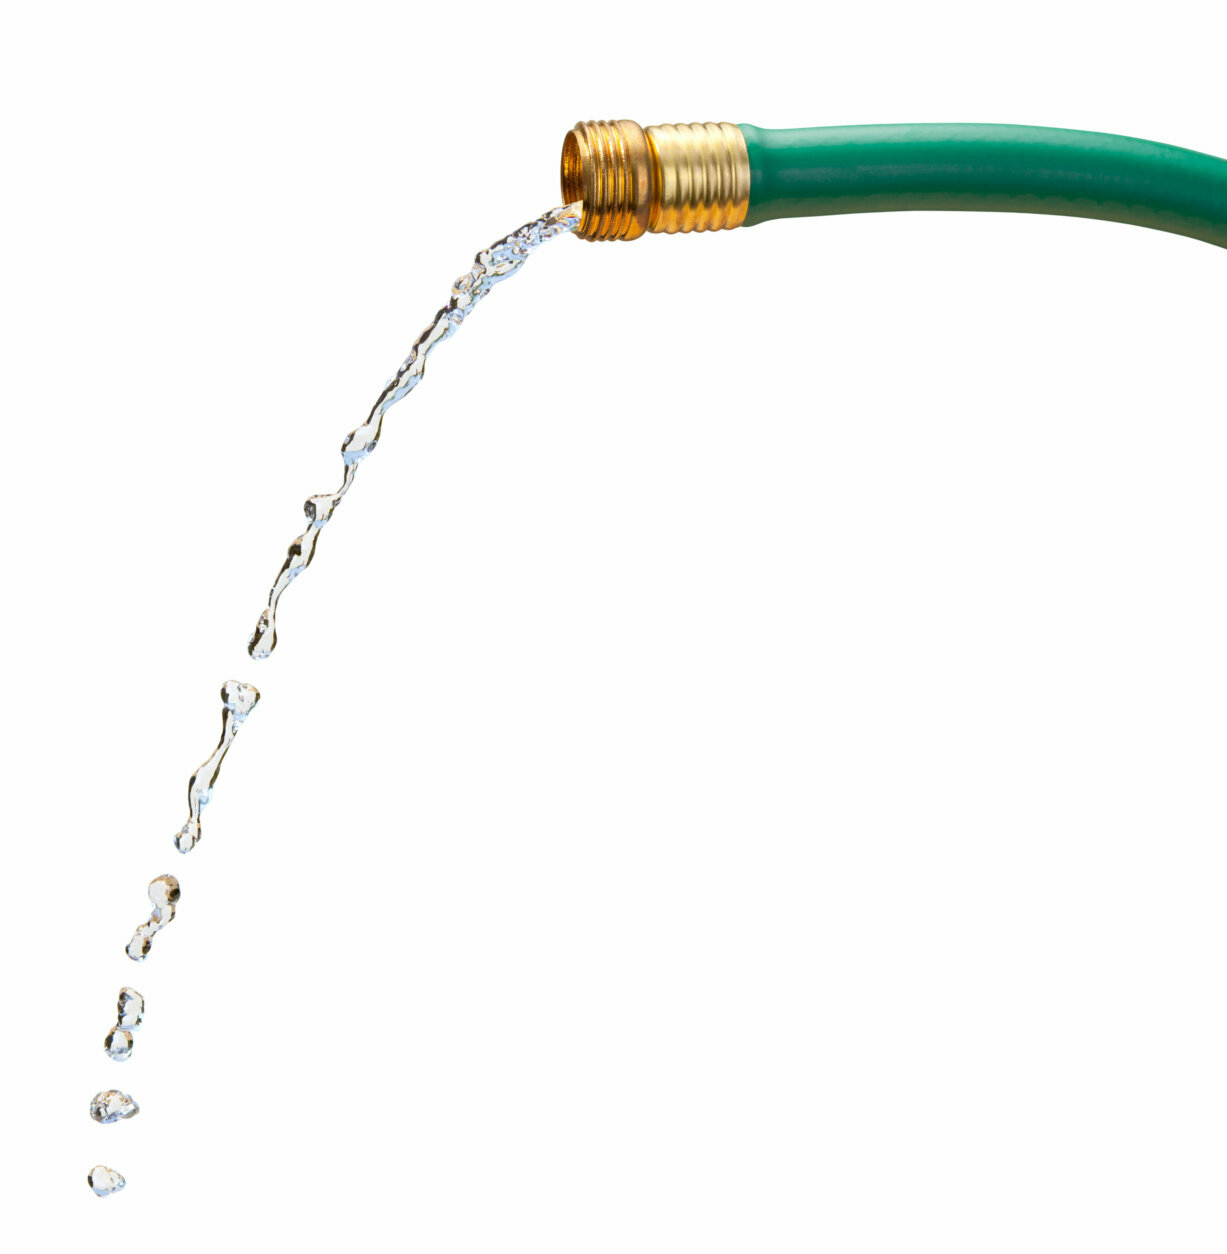 Green rubber hose with a brass nozzle.  Water is pouring from the nozzle.  That image is isolated on a white background and includes a clipping path.  The image is shown from the side, and the water is spilling out turning into drops.